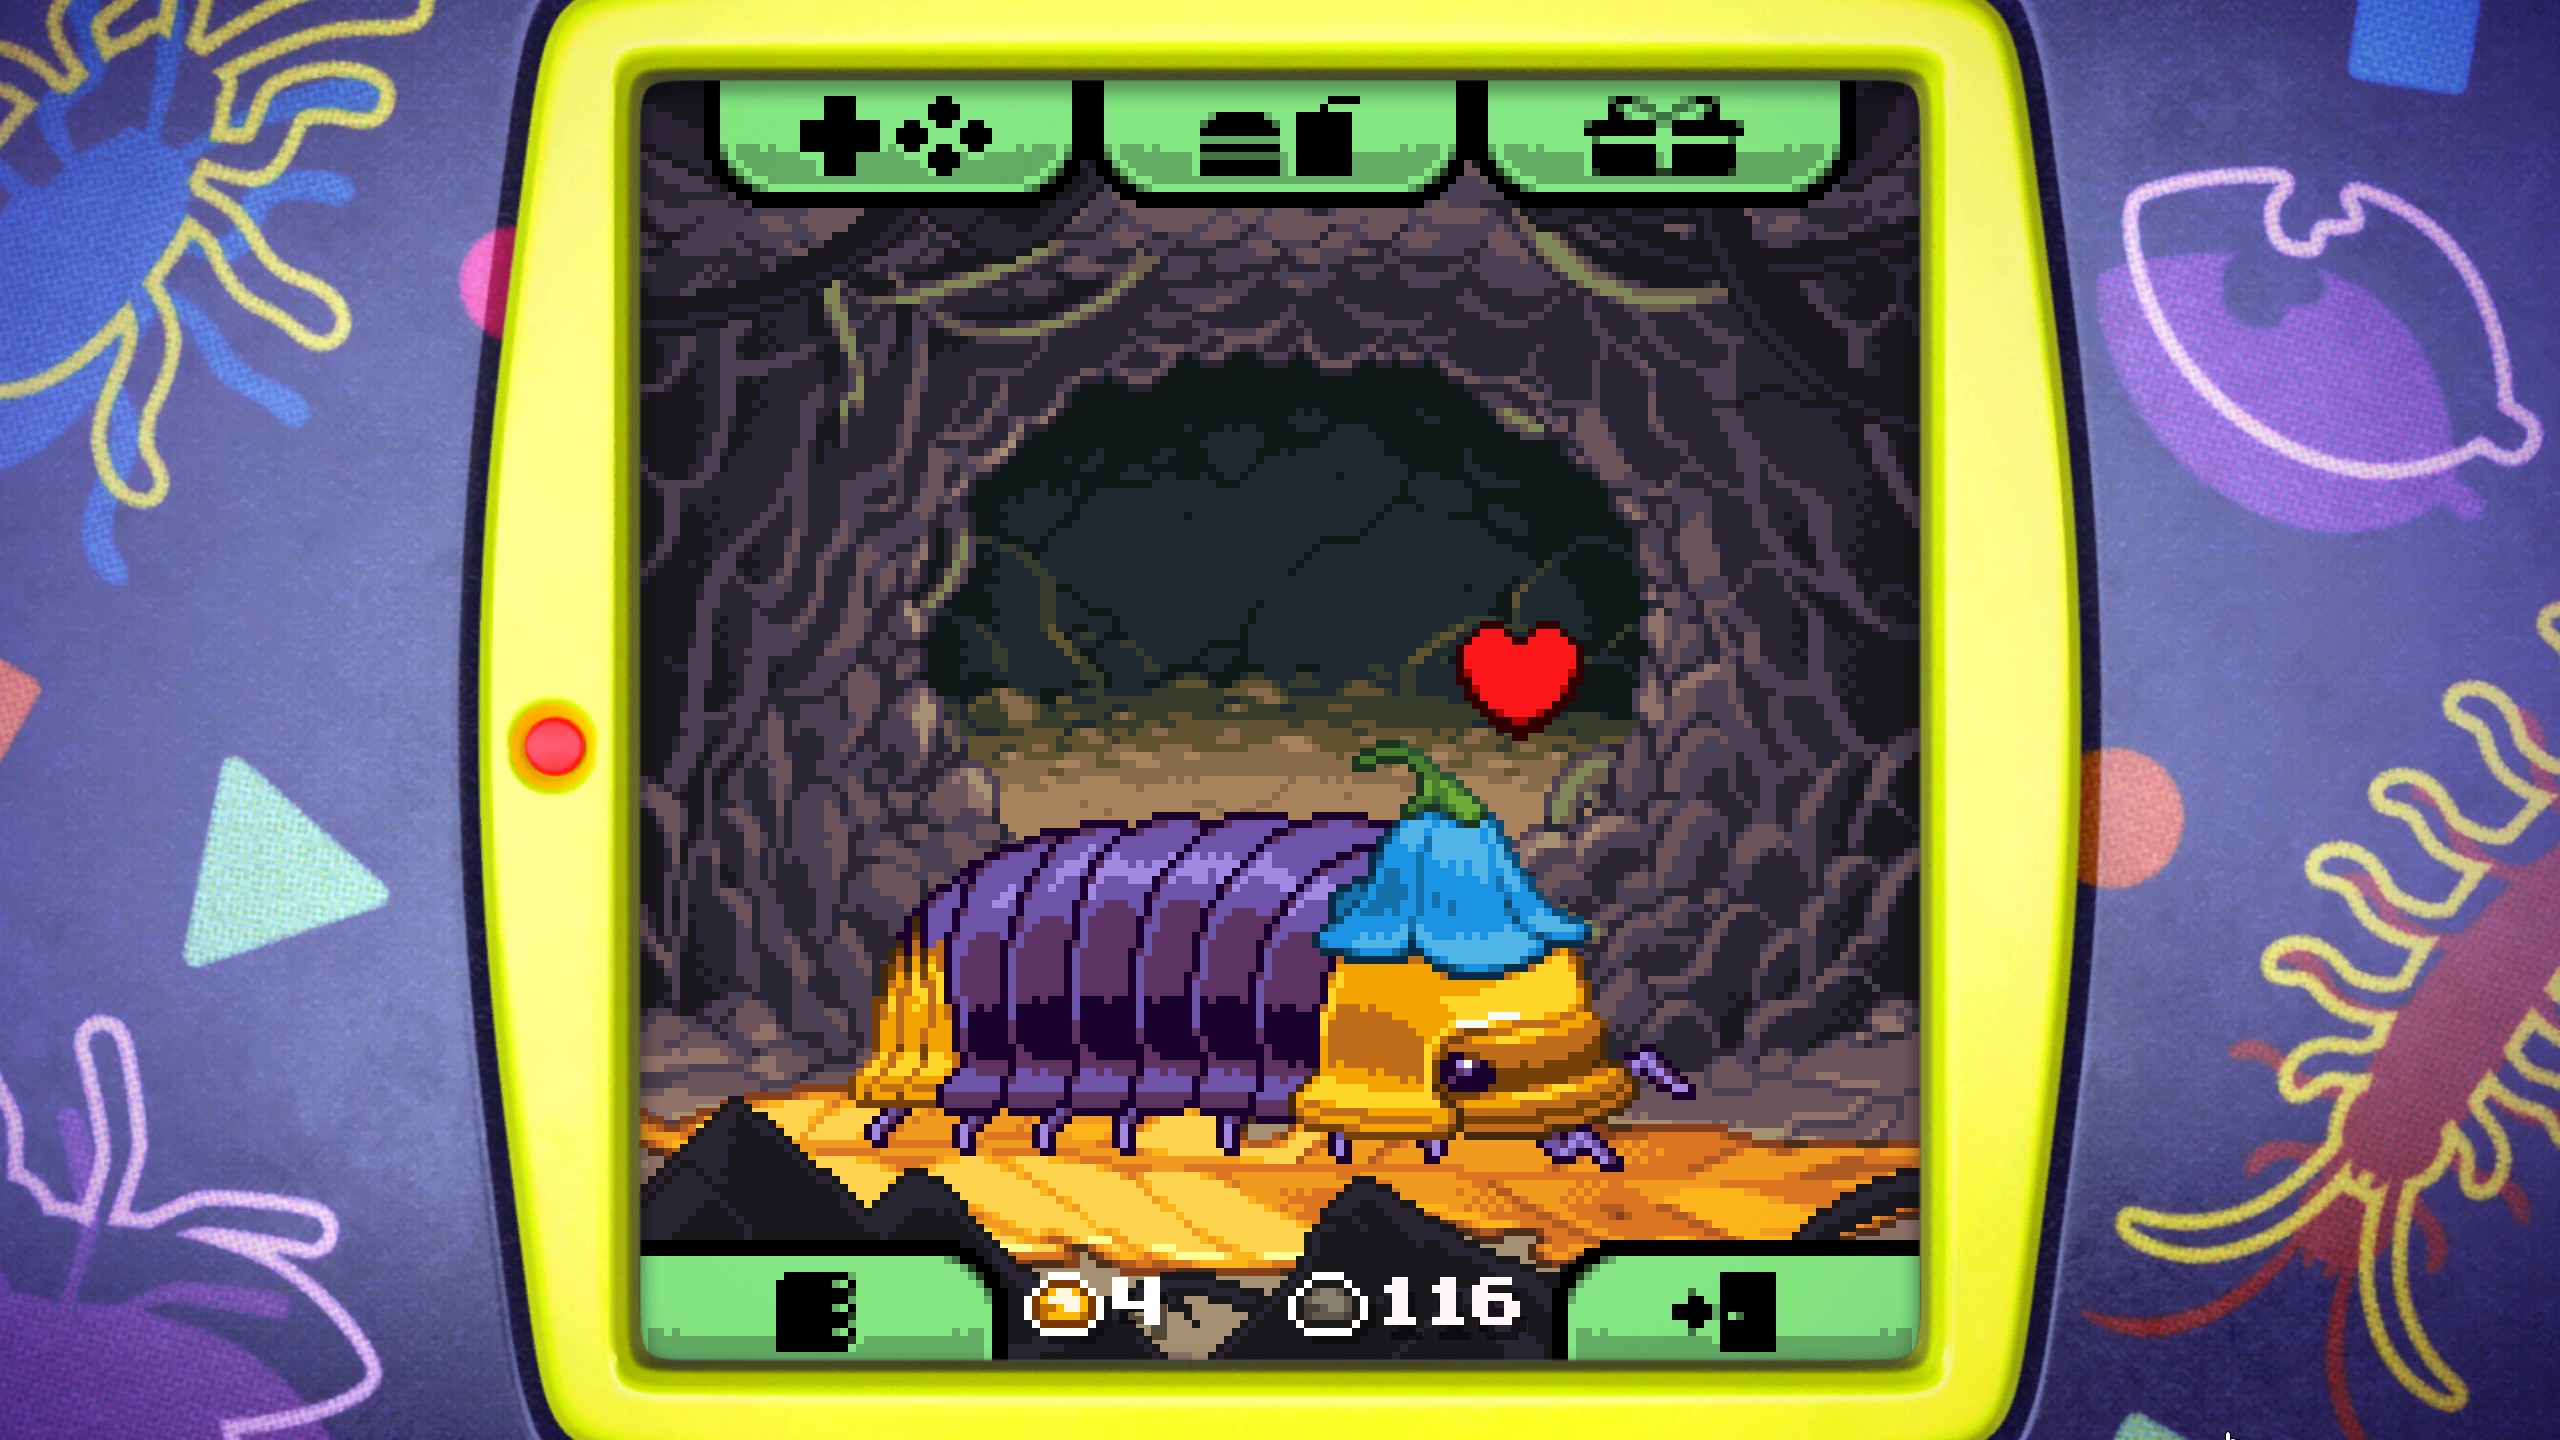  Thanks to this Tamagotchi-like critter care game I now believe that bugs can be cute too 